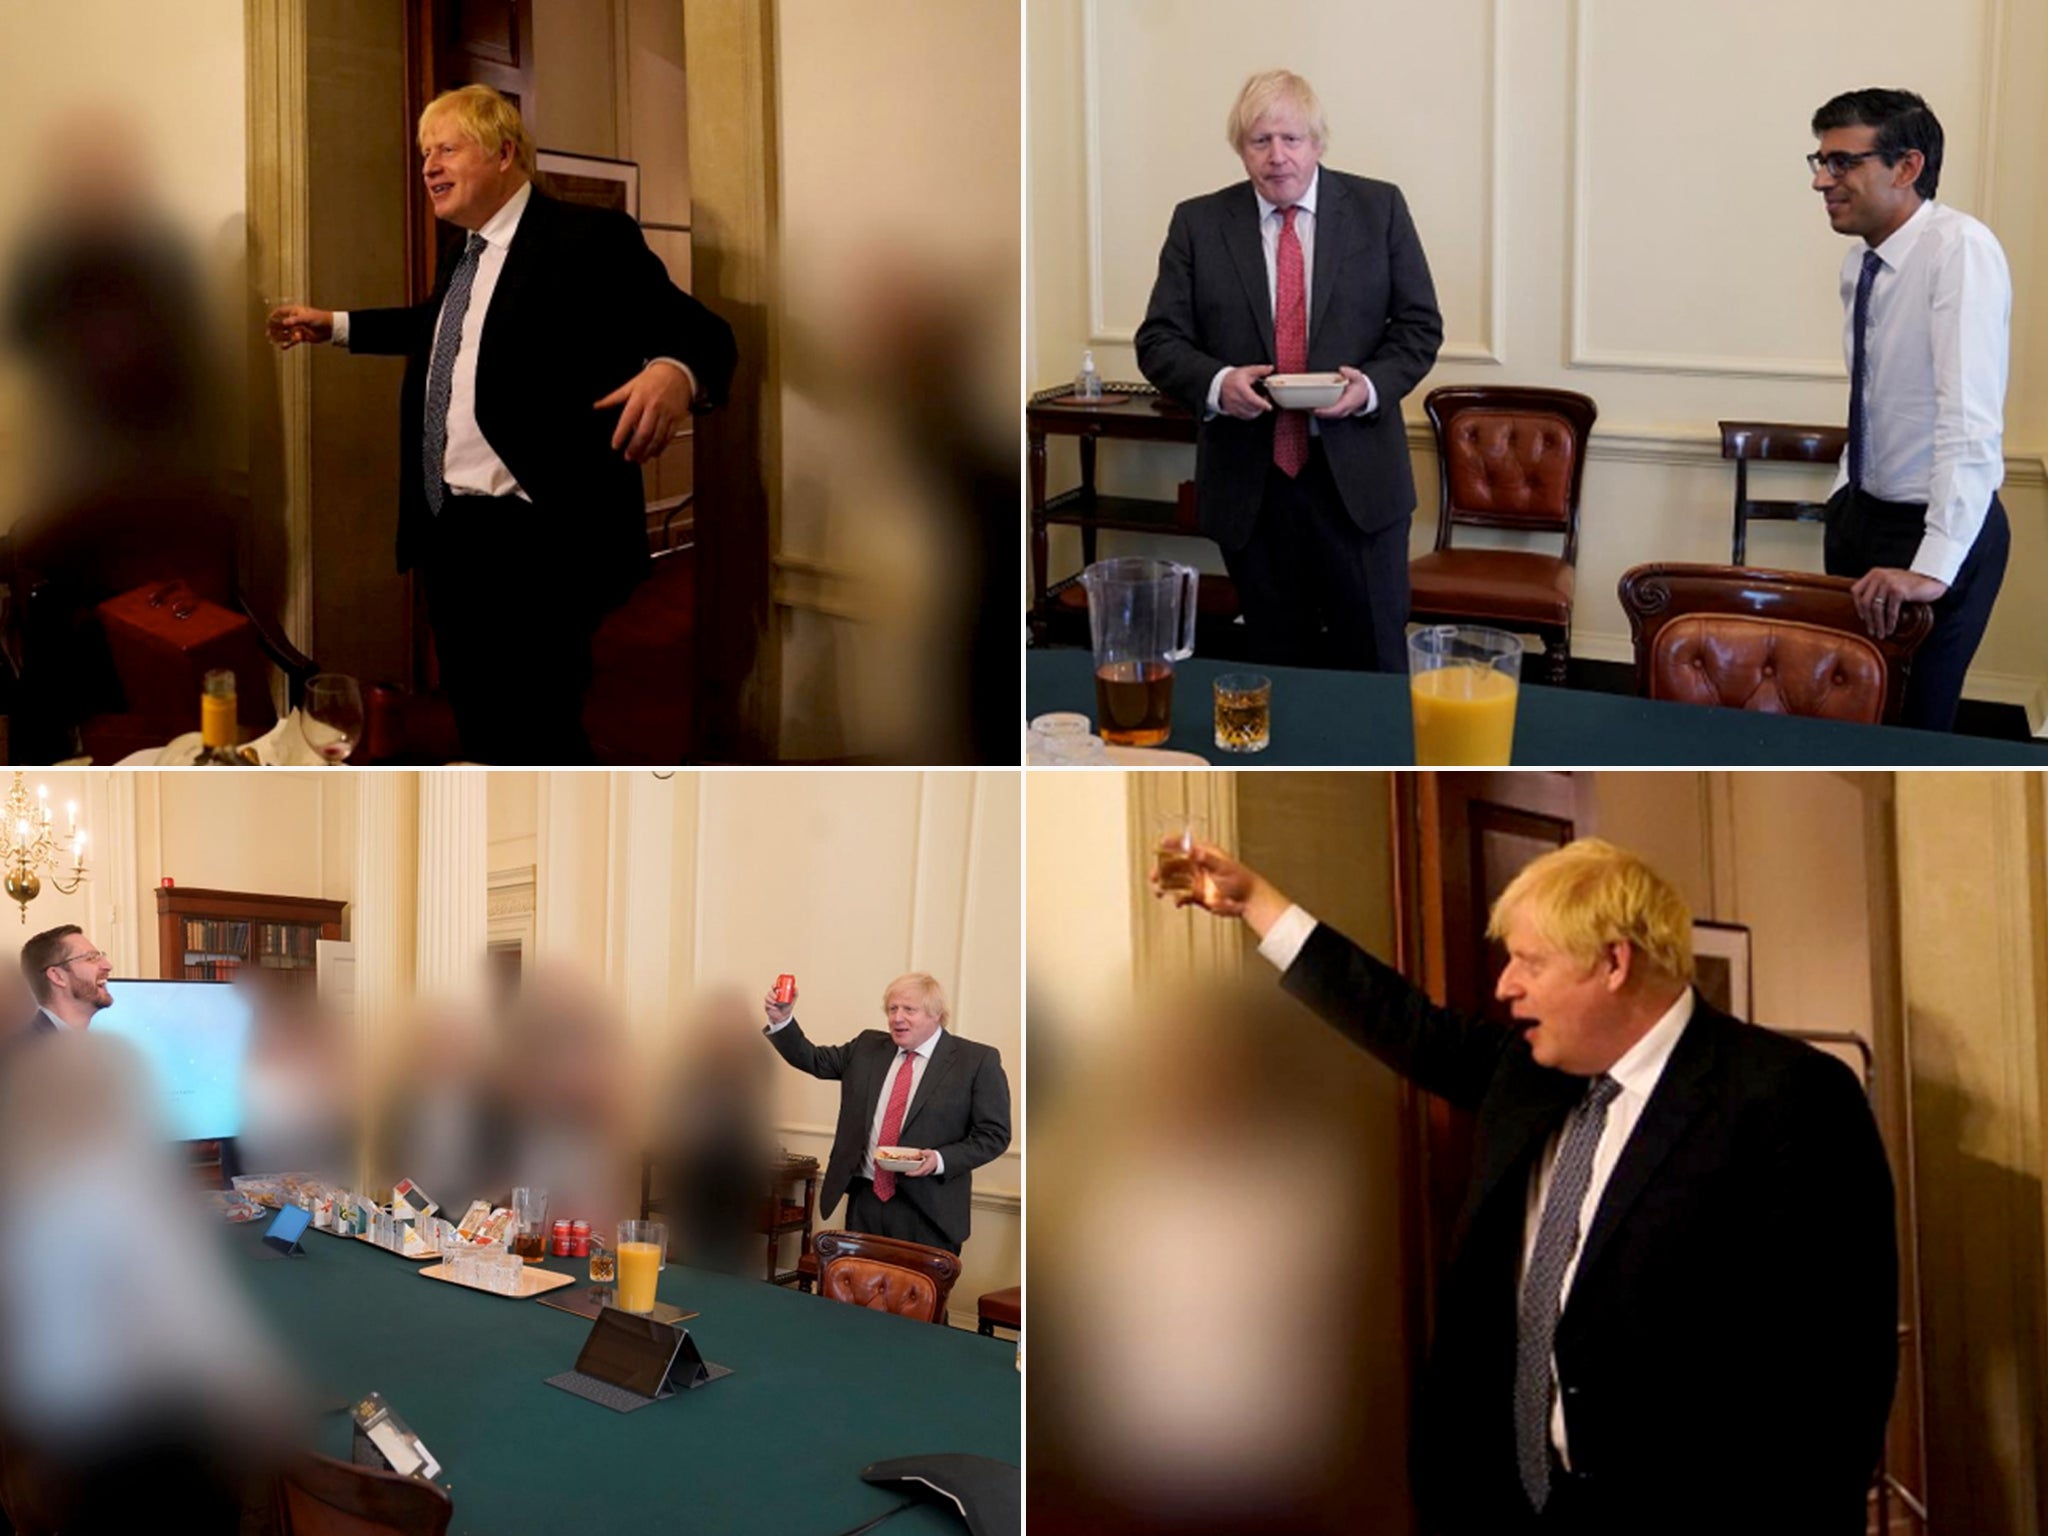 Some of the images in the Sue Gray report published Wednesday show the prime minister attending multiple lockdown events